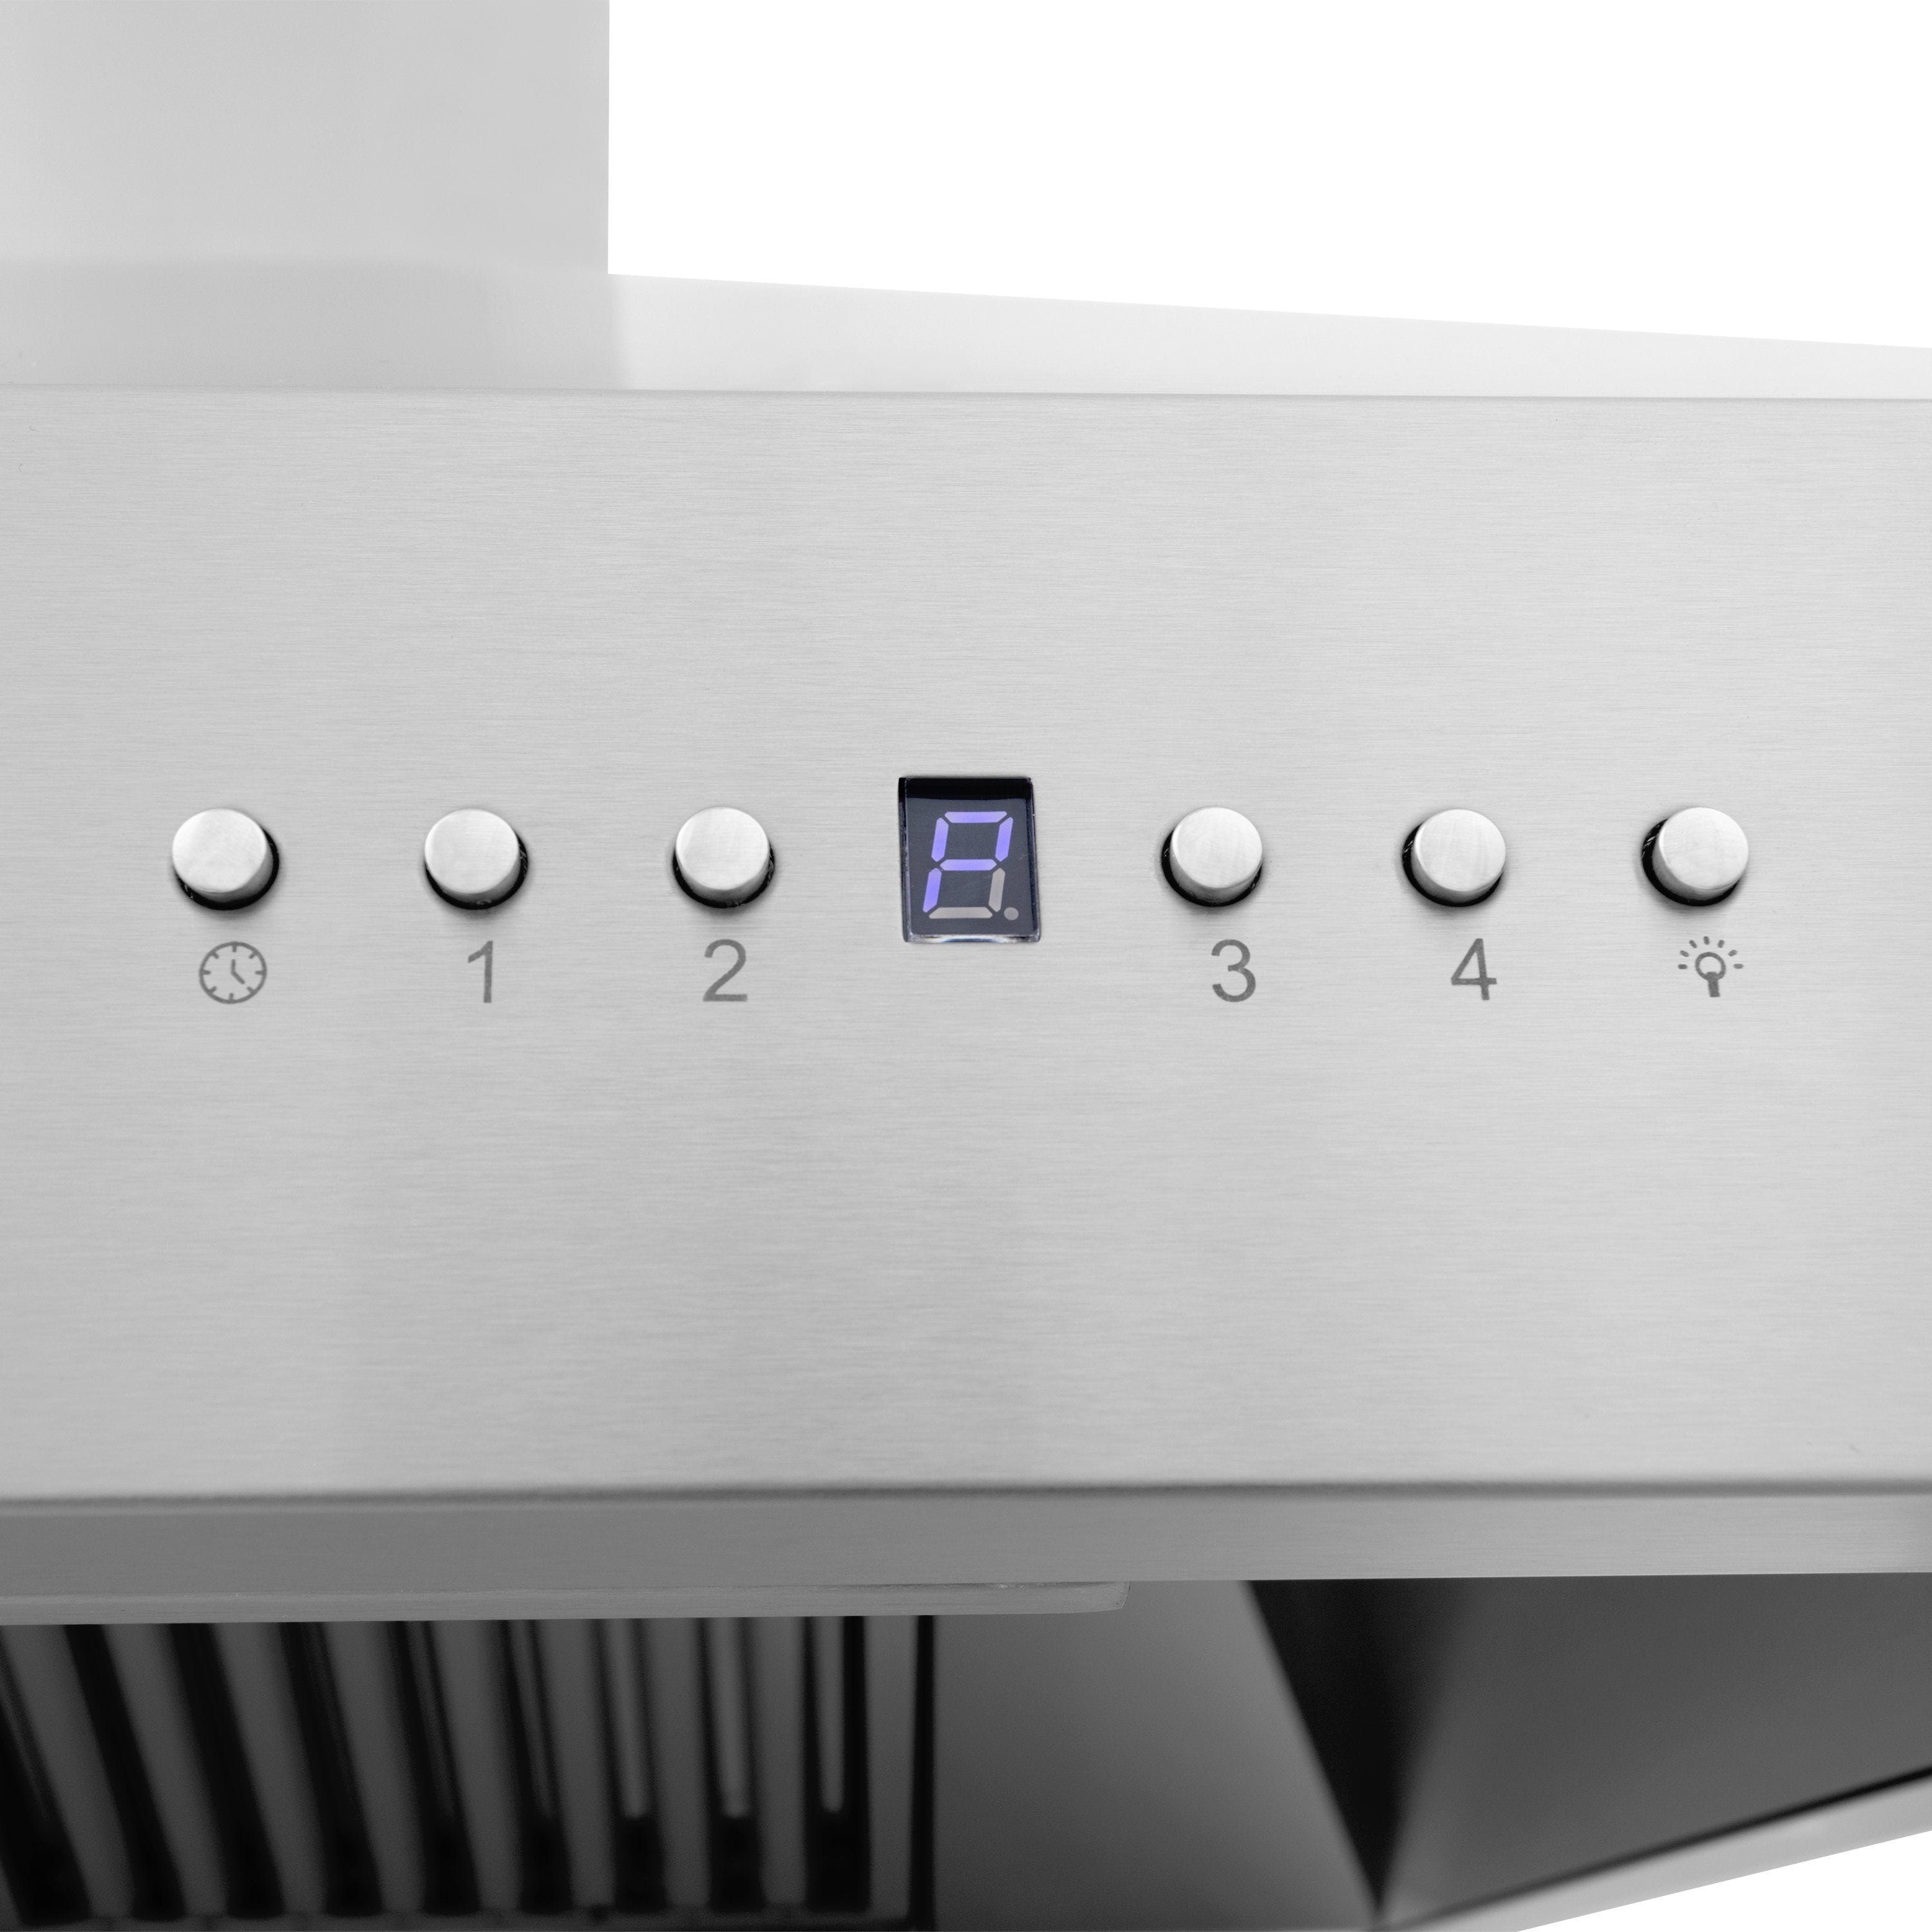 30" ZLINE CrownSound‚ Ducted Vent Wall Mount Range Hood in Stainless Steel with Built-in Bluetooth Speakers (697CRN-BT-30)